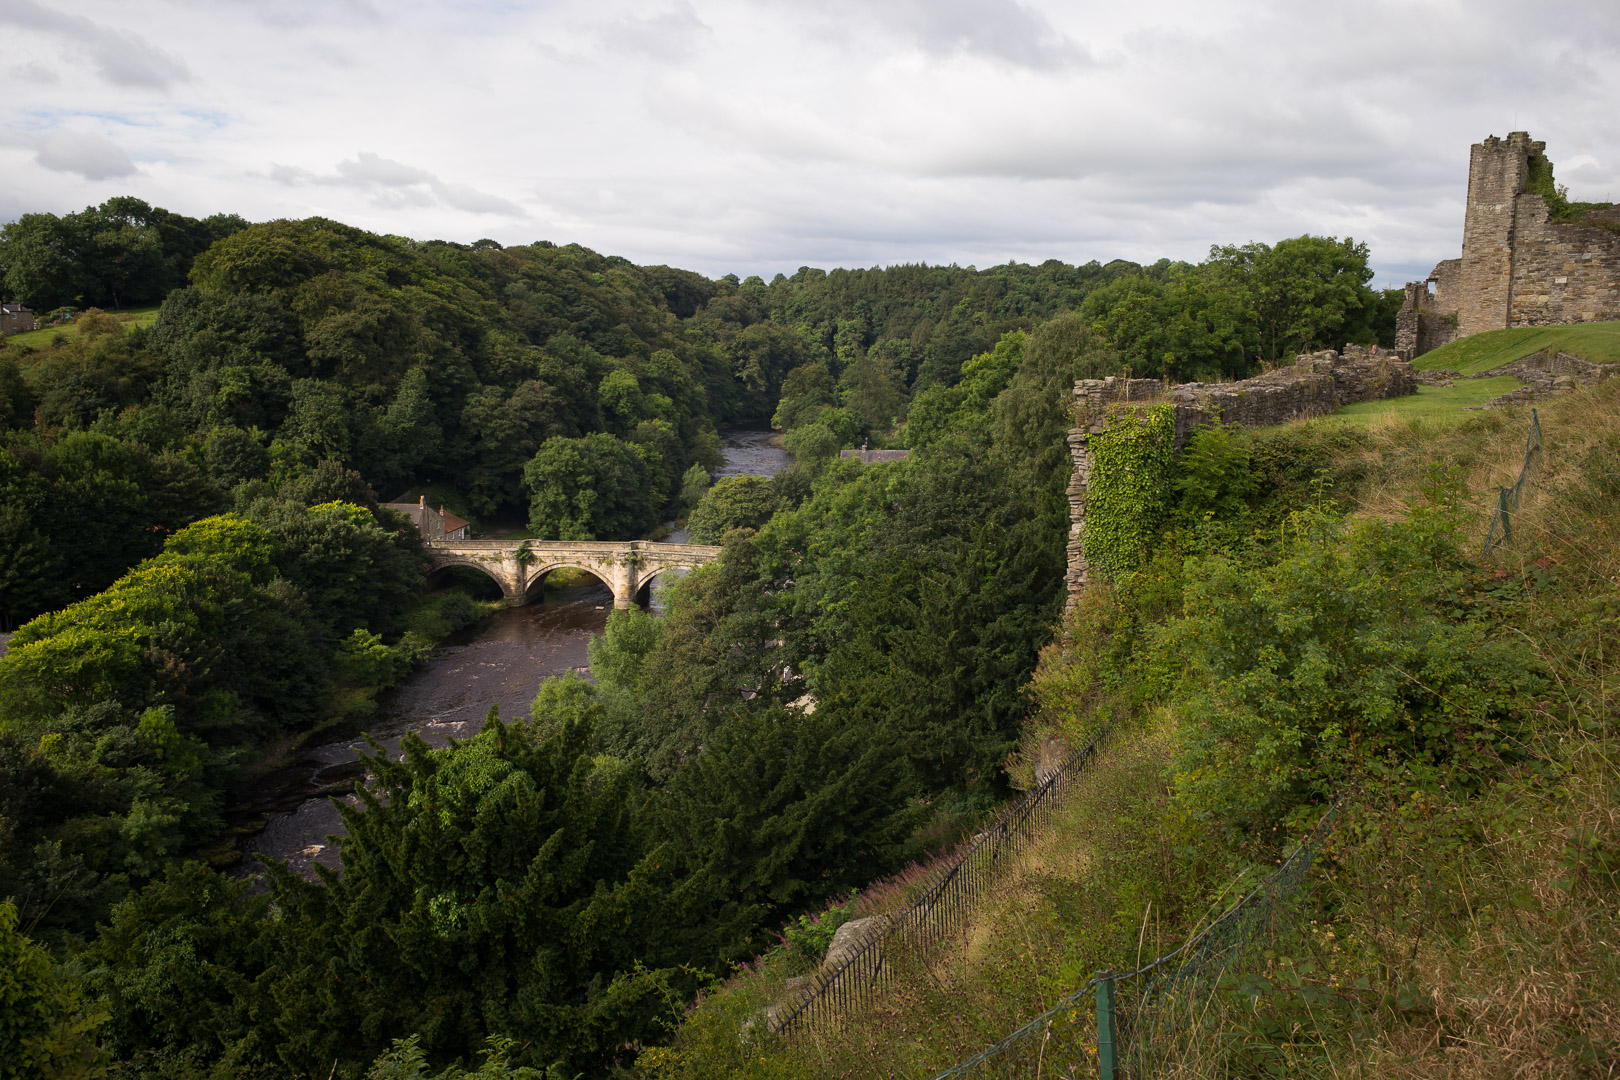 The castle uses the river on one side as a natural barrier, and the cliff falls steeply.